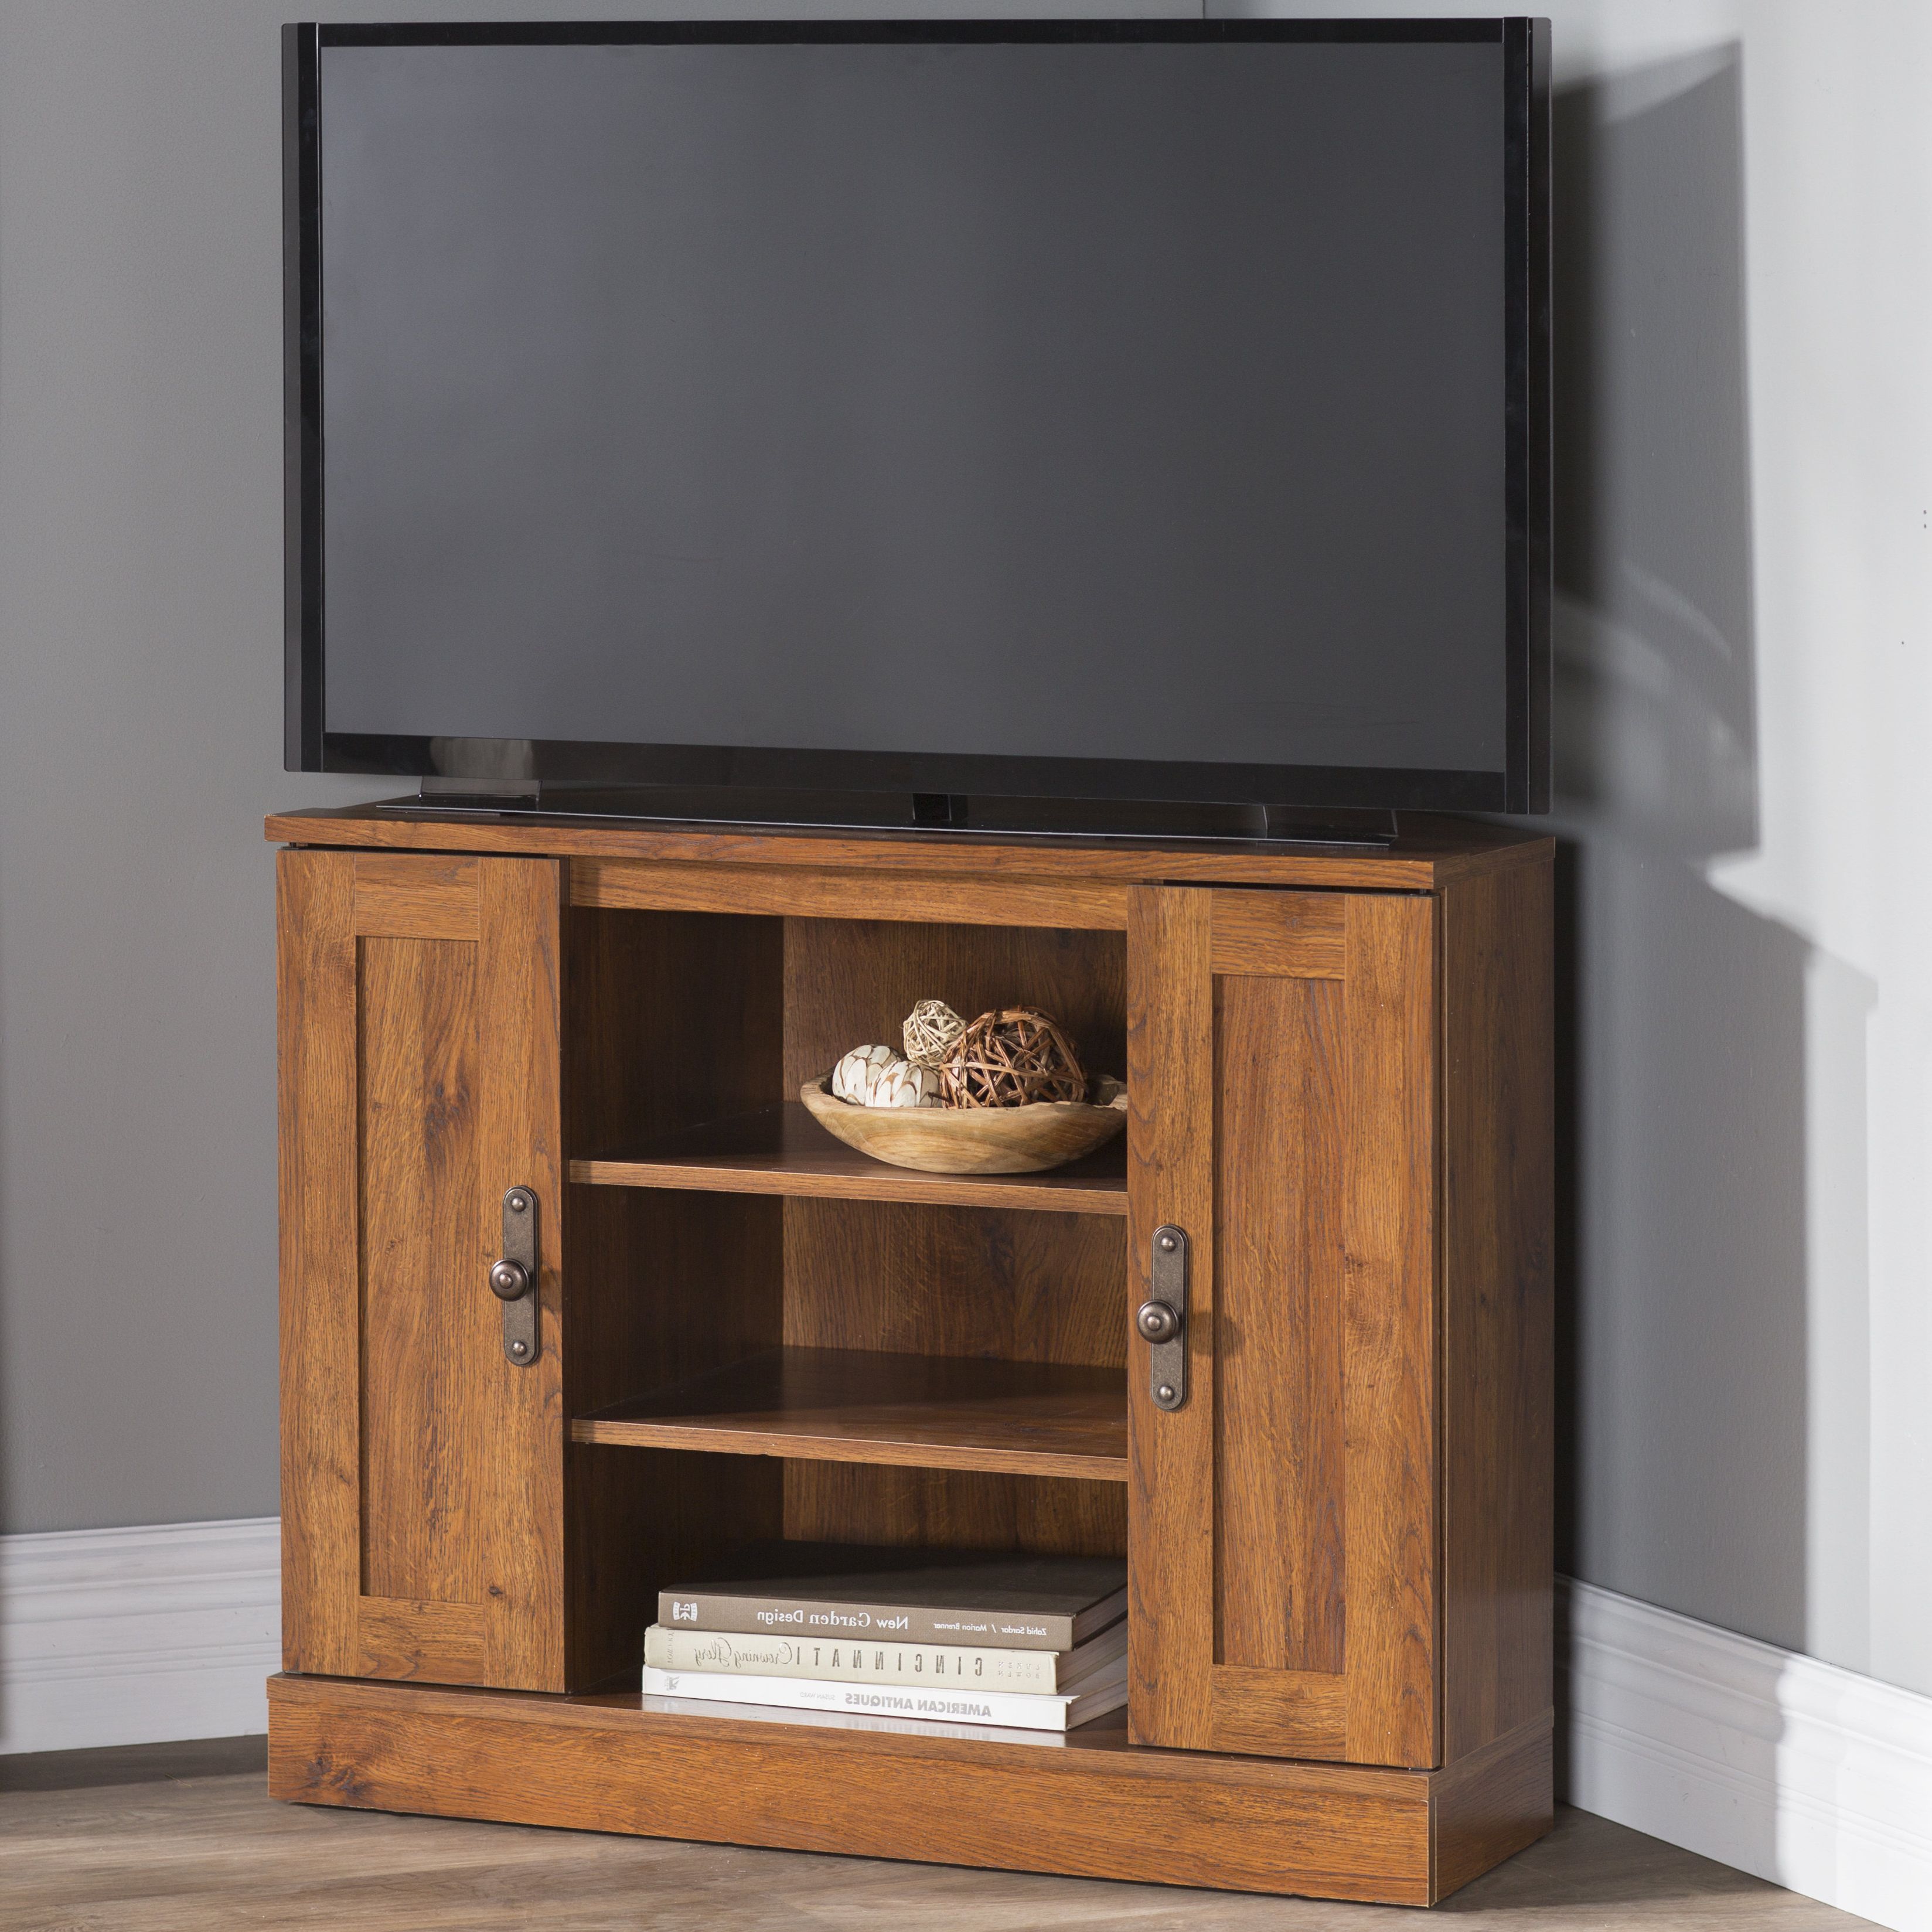 Triangular Tv Stands With Trendy Alcott Hill Englewood Corner Tv Stand For Tvs Up To 37" & Reviews (View 2 of 20)